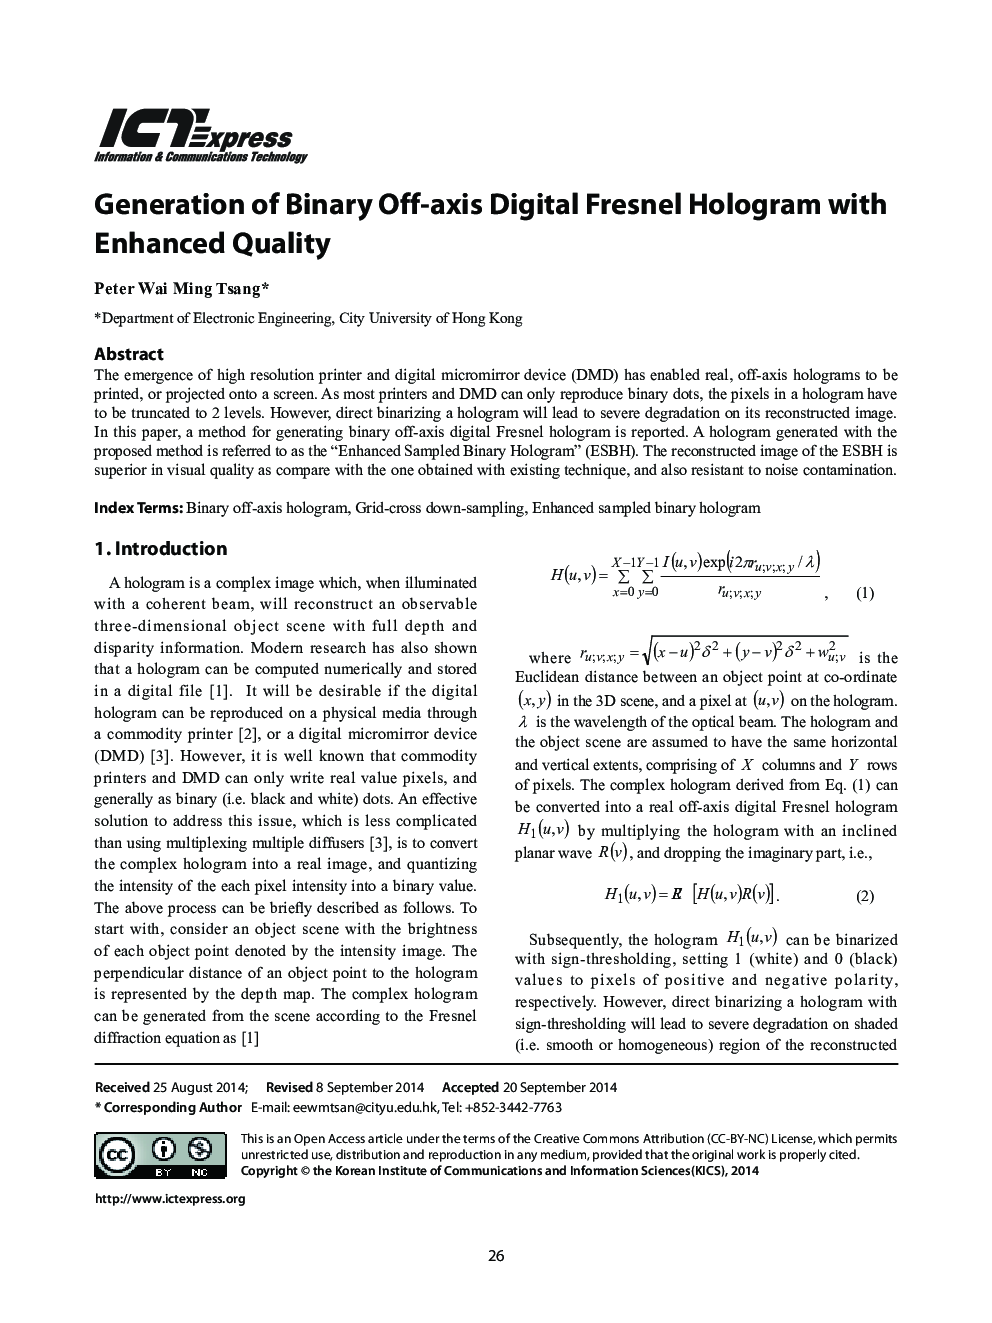 Generation of Binary Off-axis Digital Fresnel Hologram with Enhanced Quality 